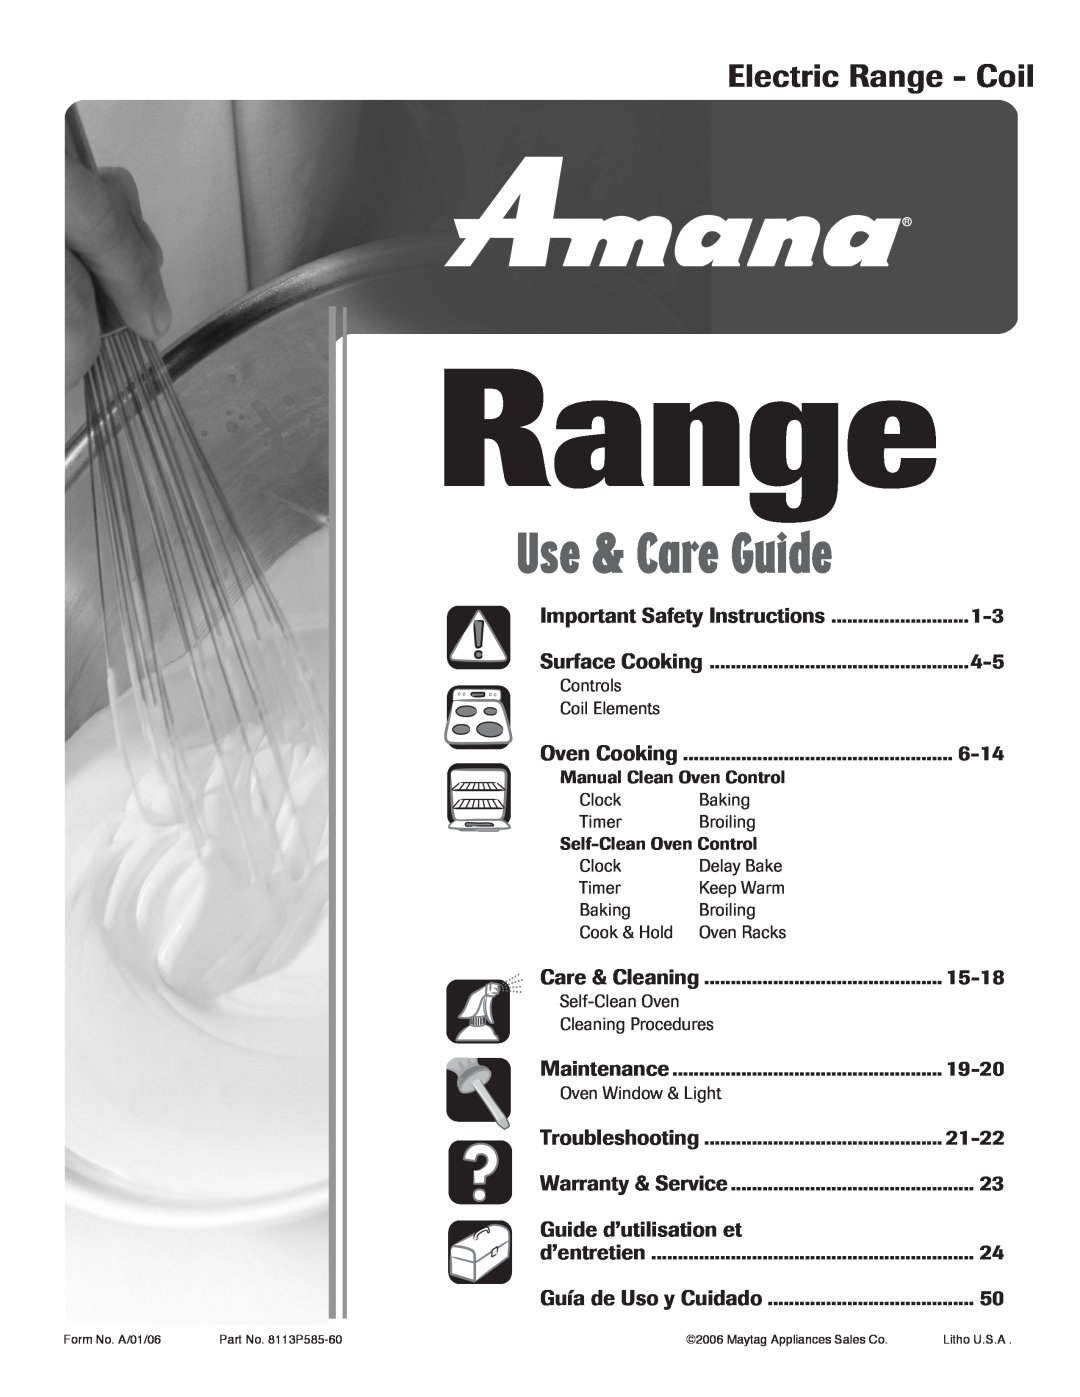 Amana important safety instructions Electric Range - Coil, Use & Care Guide 